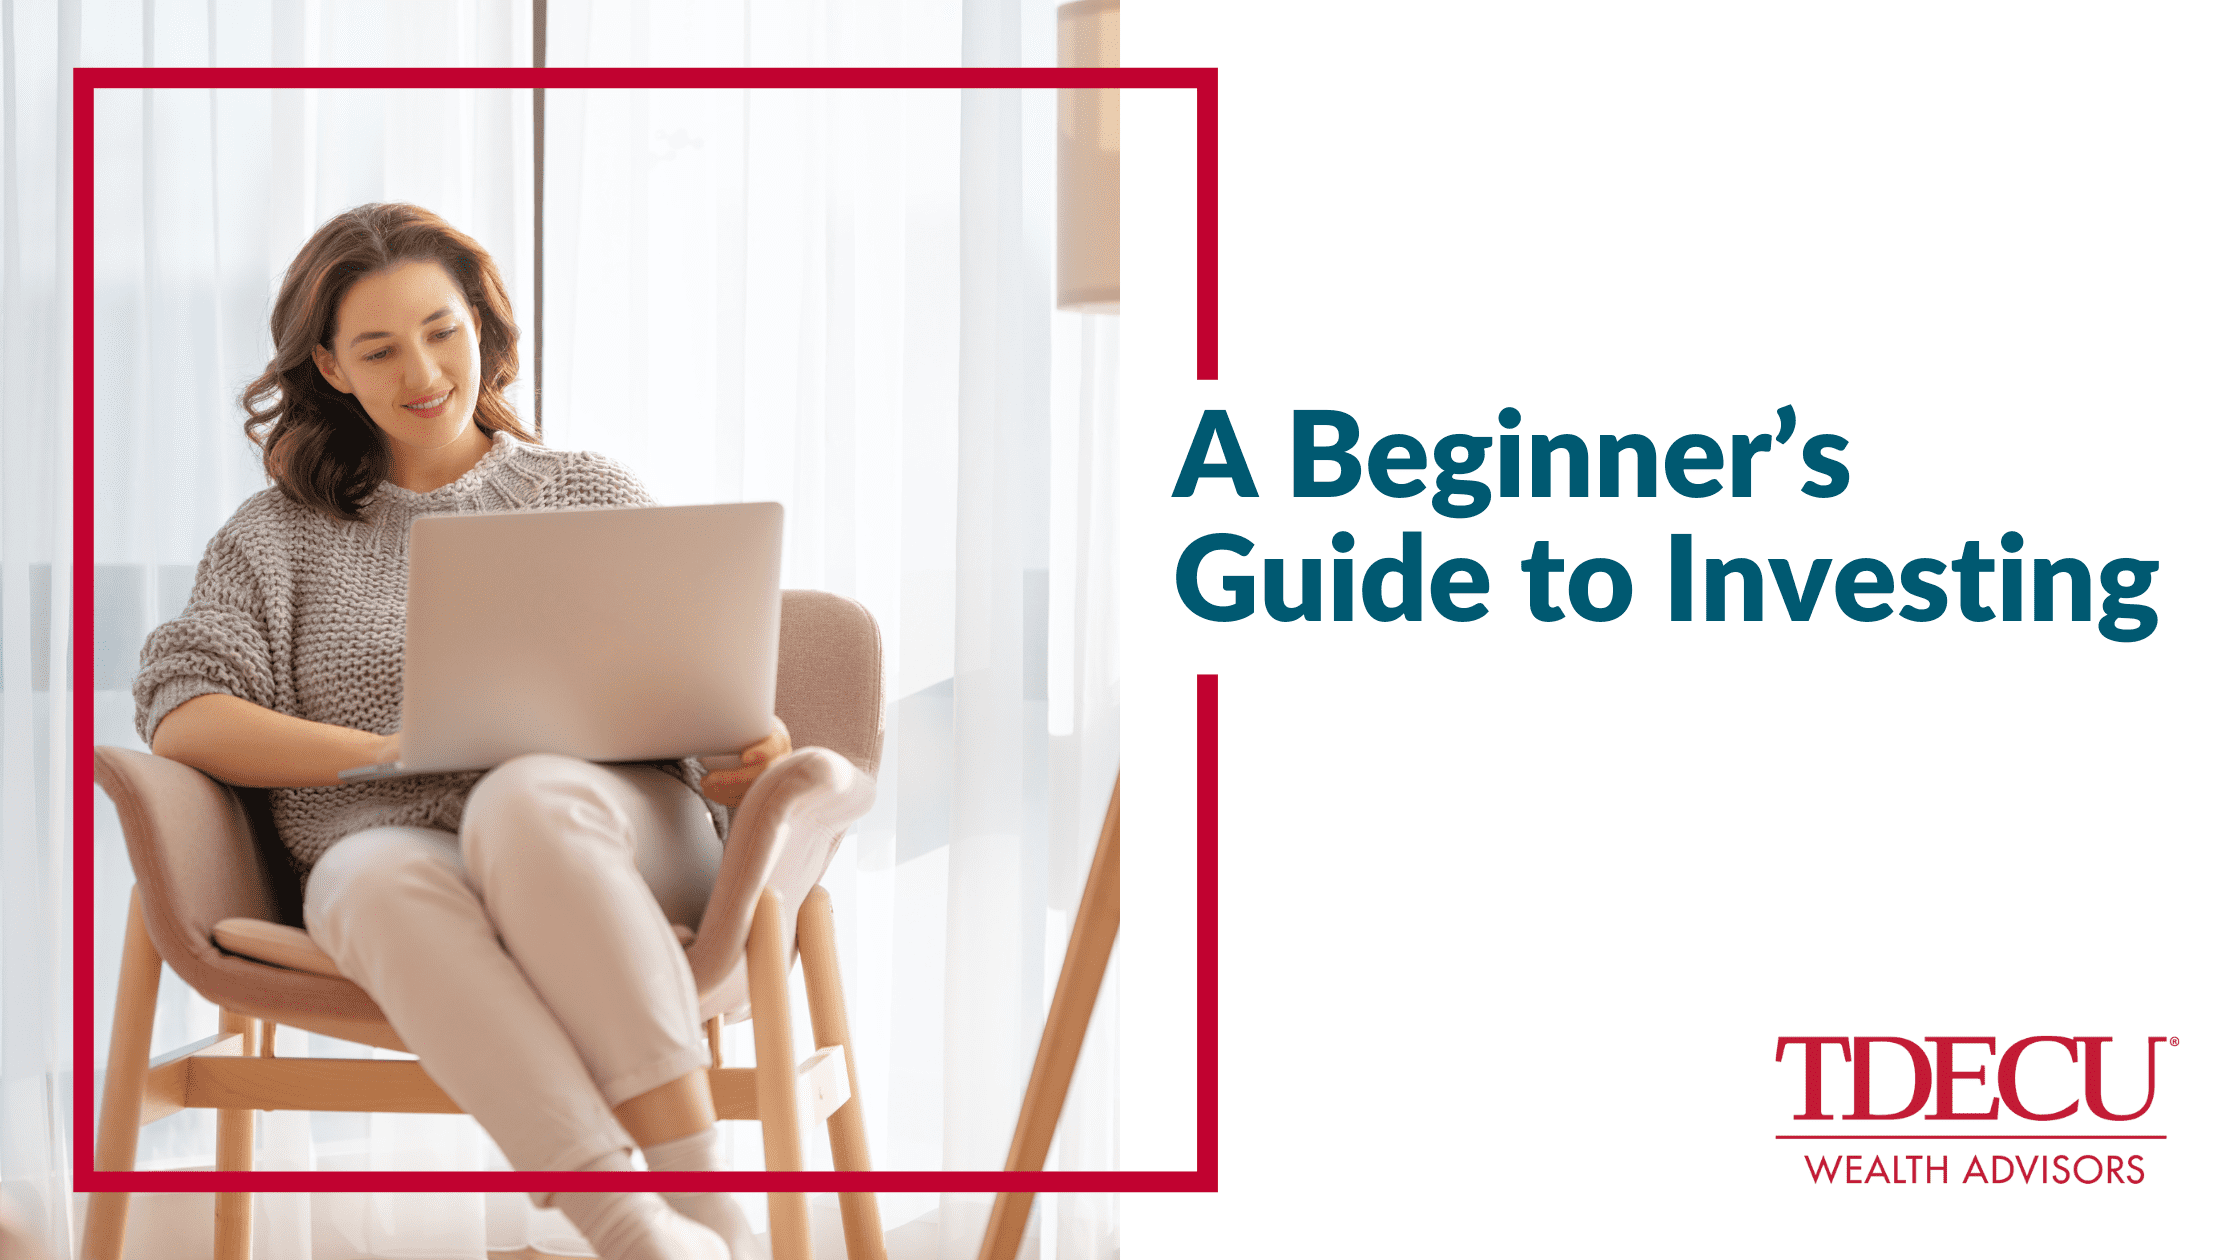 A Beginner’s Guide to Investing